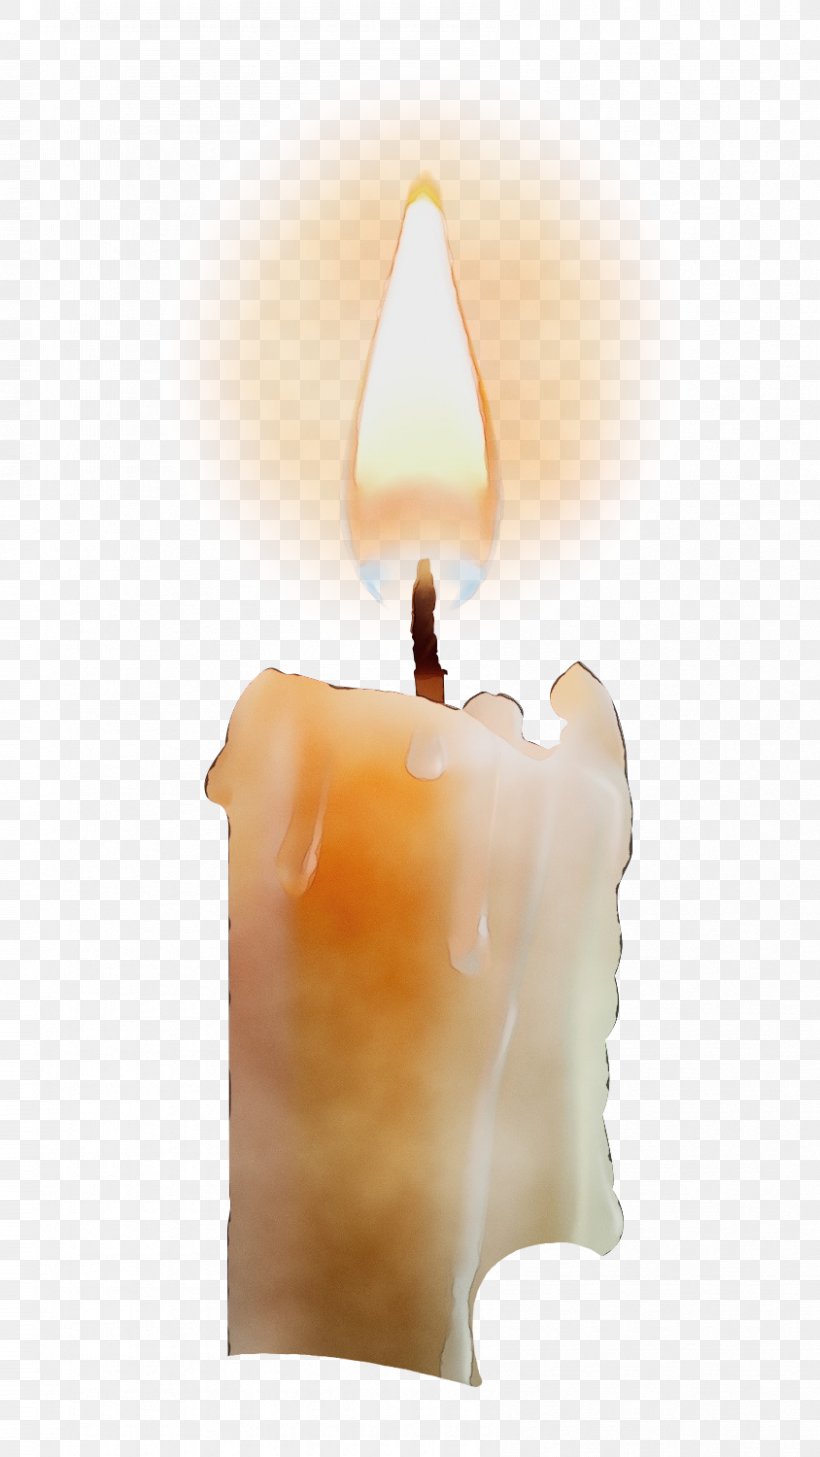 Candle Lighting Wax Flameless Candle Flame, PNG, 844x1500px, Watercolor, Candle, Candle Holder, Flame, Flameless Candle Download Free